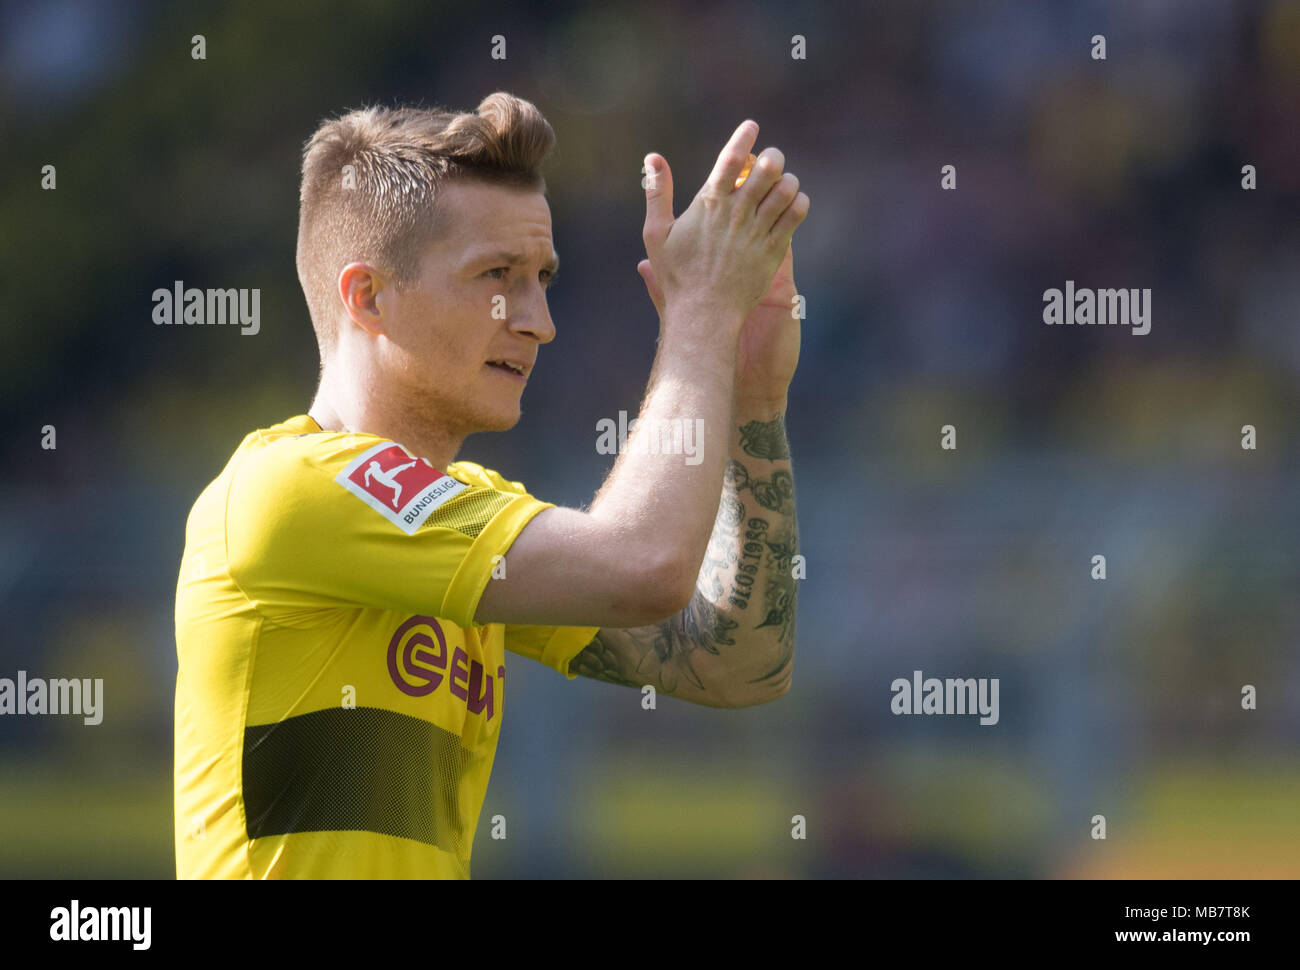 08 April 2018, Germany, Dortmund. Football German Bundesliga, Borussia Dortmund vs VfB Stuttgart at the Signal Iduna Park. Dortmund's Marco Reus clapping the fans after being substituted. Photo: Bernd Thissen/dpa - IMPORTANT NOTICE: Due to the German Football League·s (DFL) accreditation regulations, publication and redistribution online and in online media is limited during the match to fifteen images per match Stock Photo